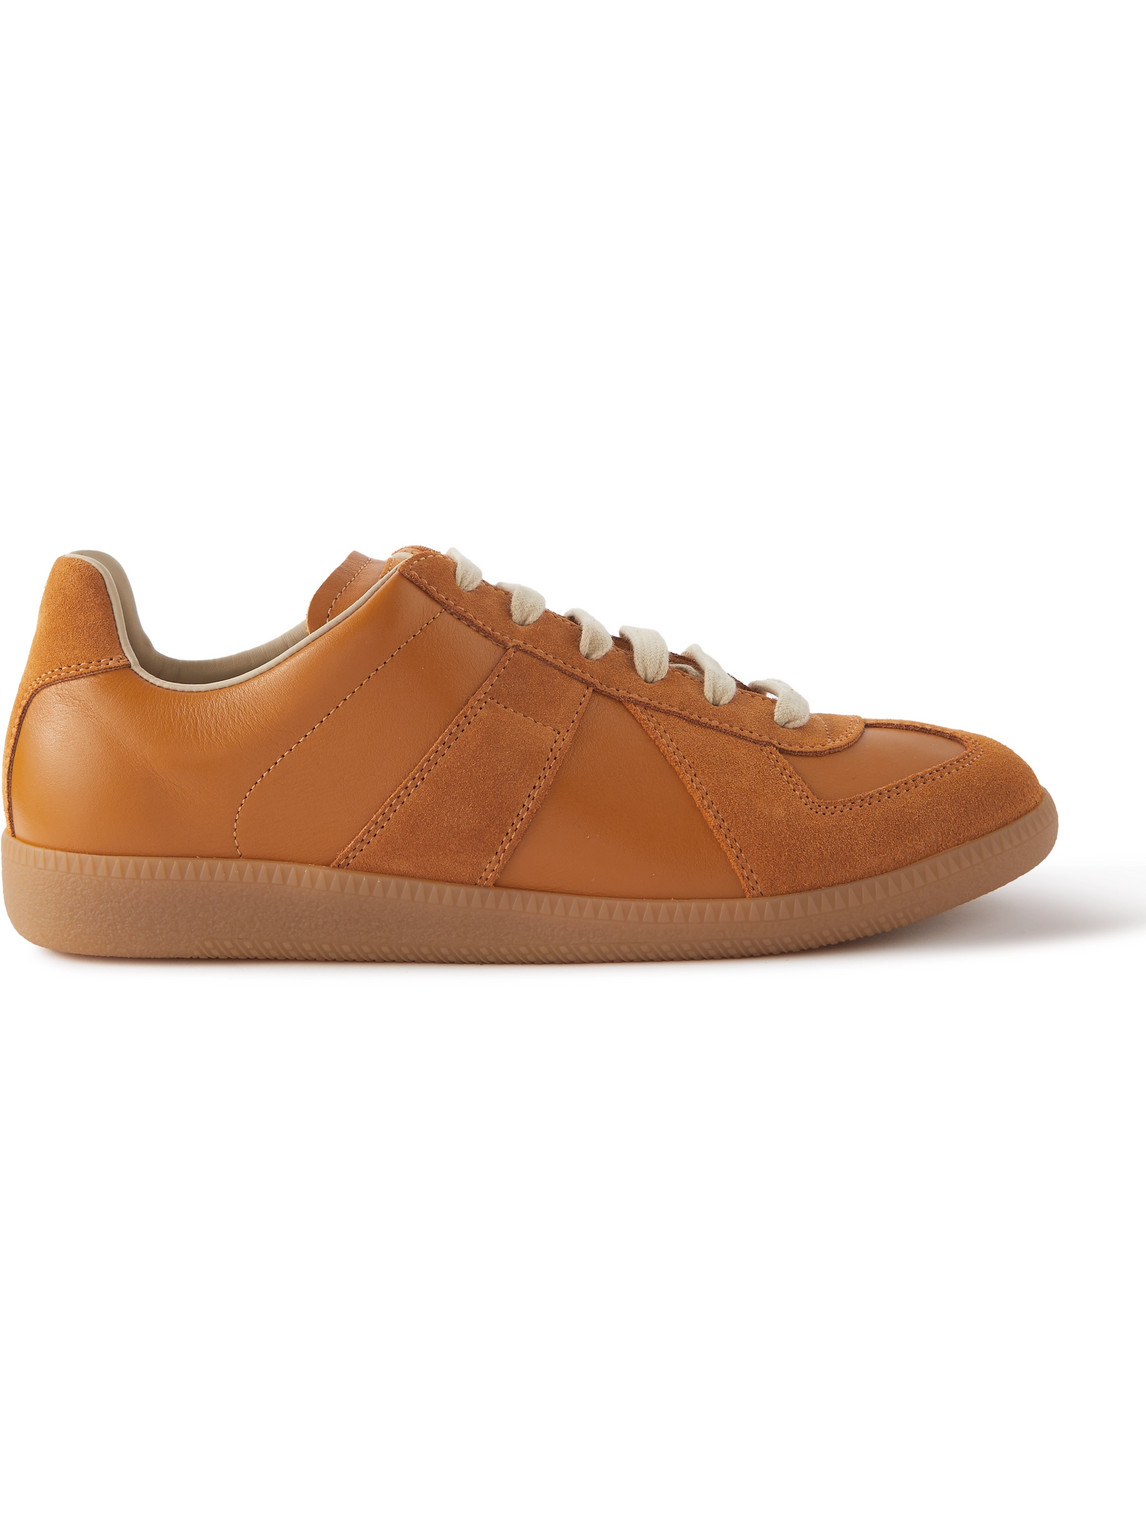 Maison Margiela Replica Leather And Suede Trainers In Orange